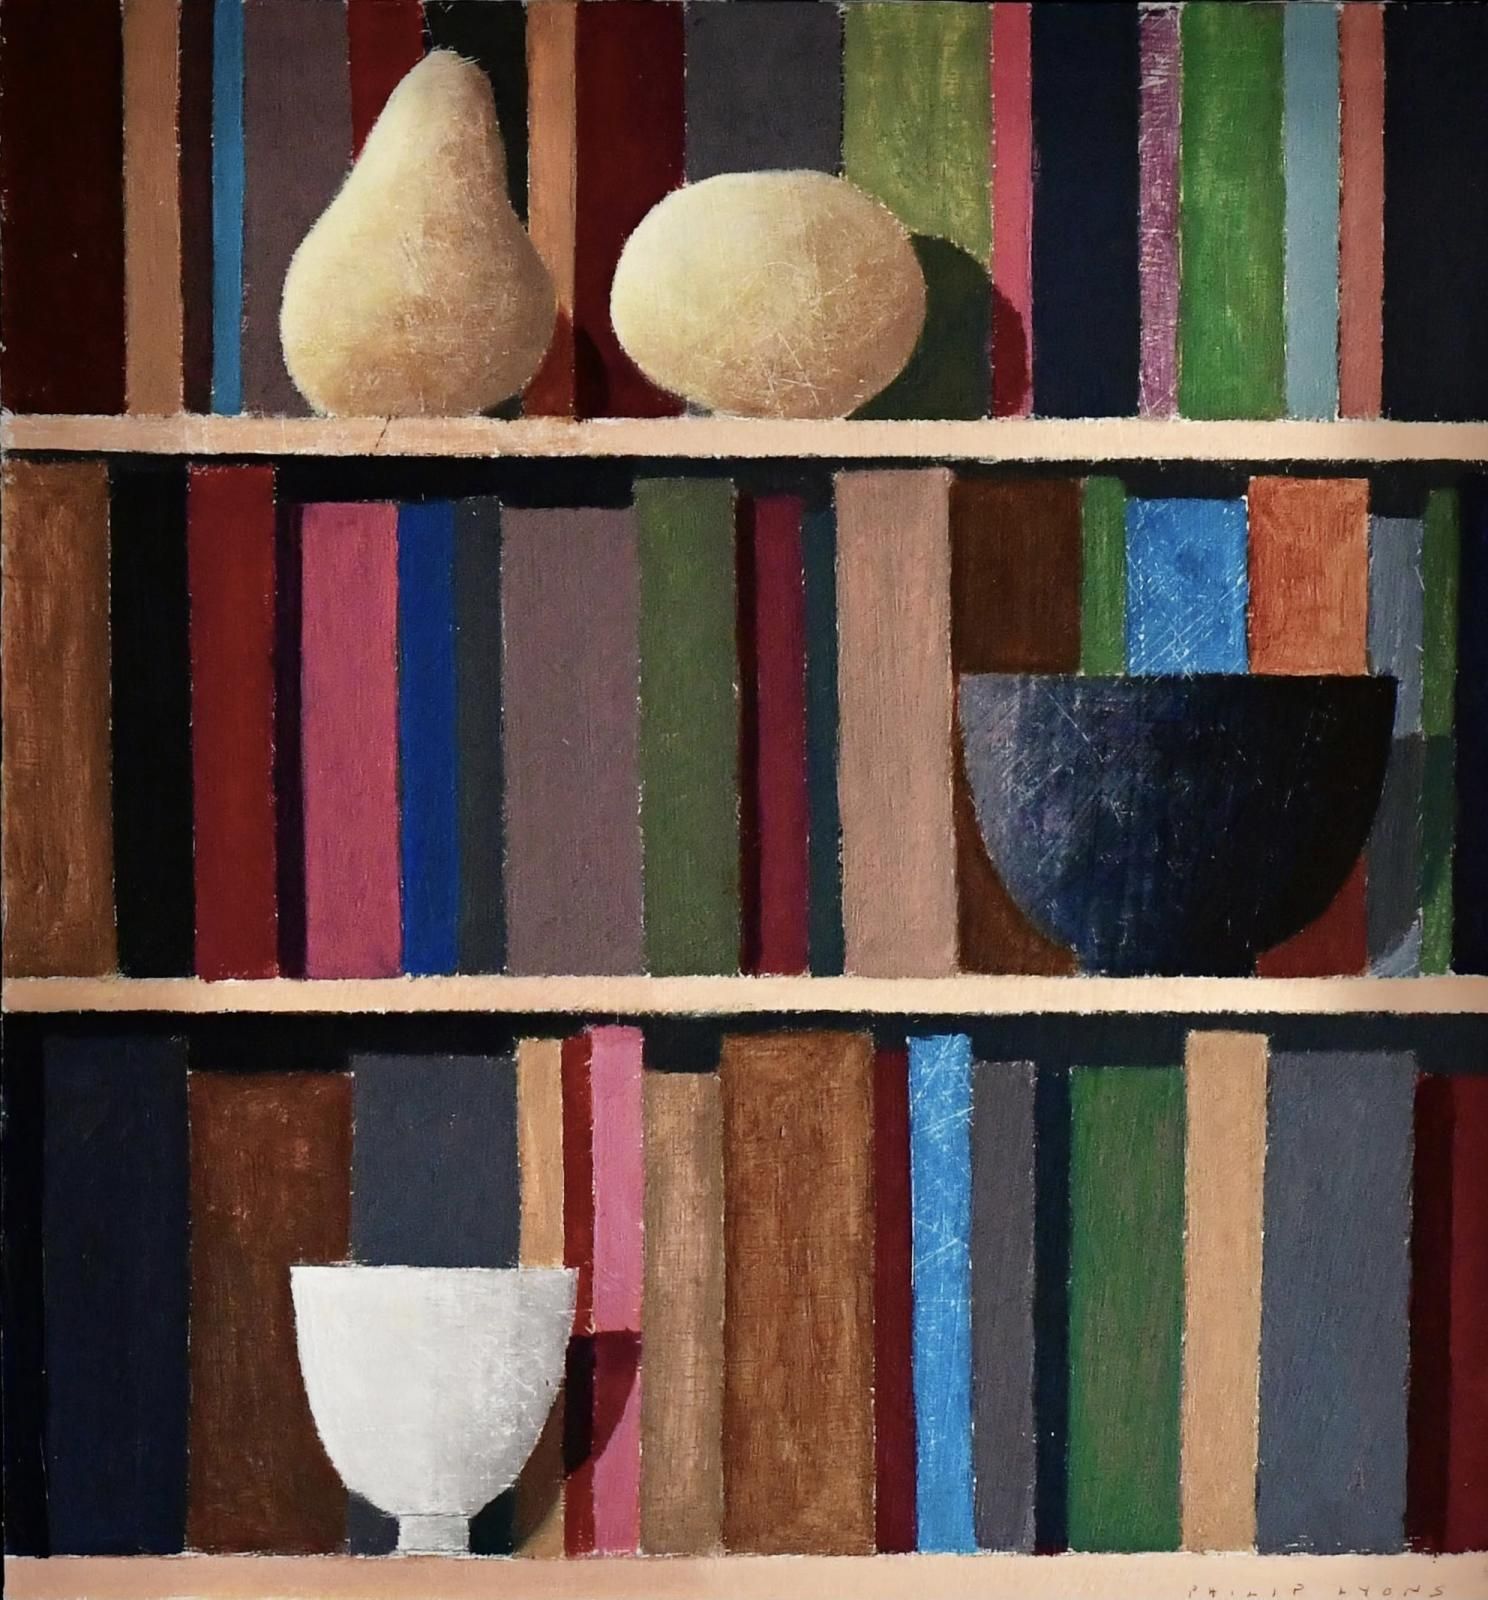 Two Gourds - Two Bowls - Three Shelves ( many books ) by Philip Lyons